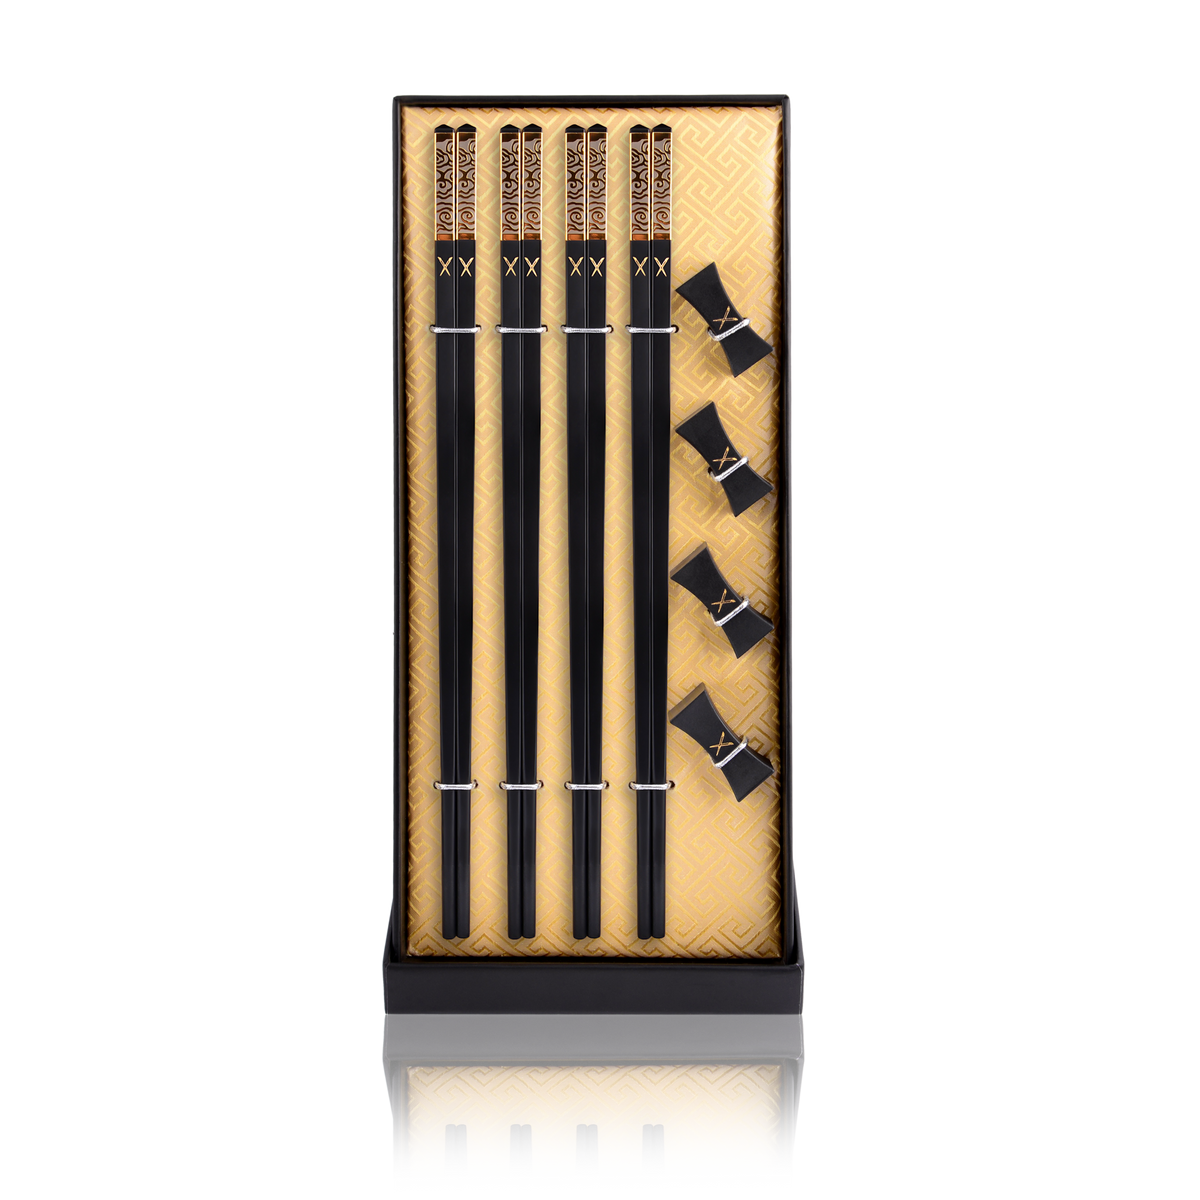 Luxury Chopsticks Set. Our chopsticks are luxurious, reusable and safe to use. Packed in a beautiful set, our designs are modern, traditional and elegant. Cloud Nine - LuxSticks